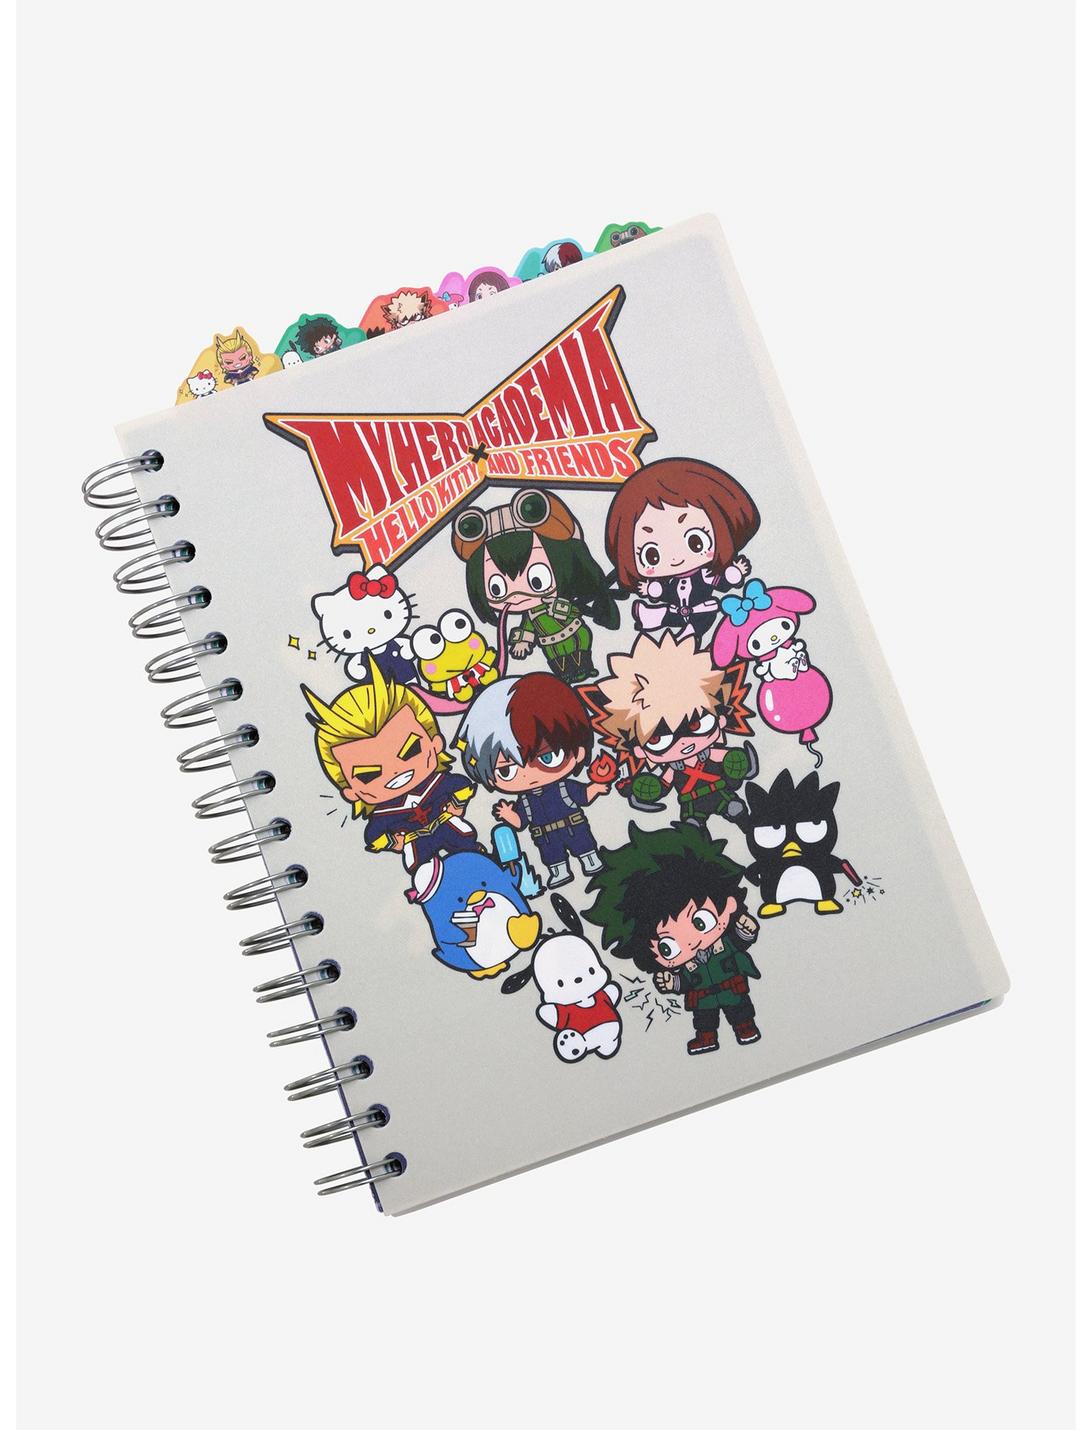 My Hero Academia X Hello Kitty And Friends Tabbed Journal, , hi-res